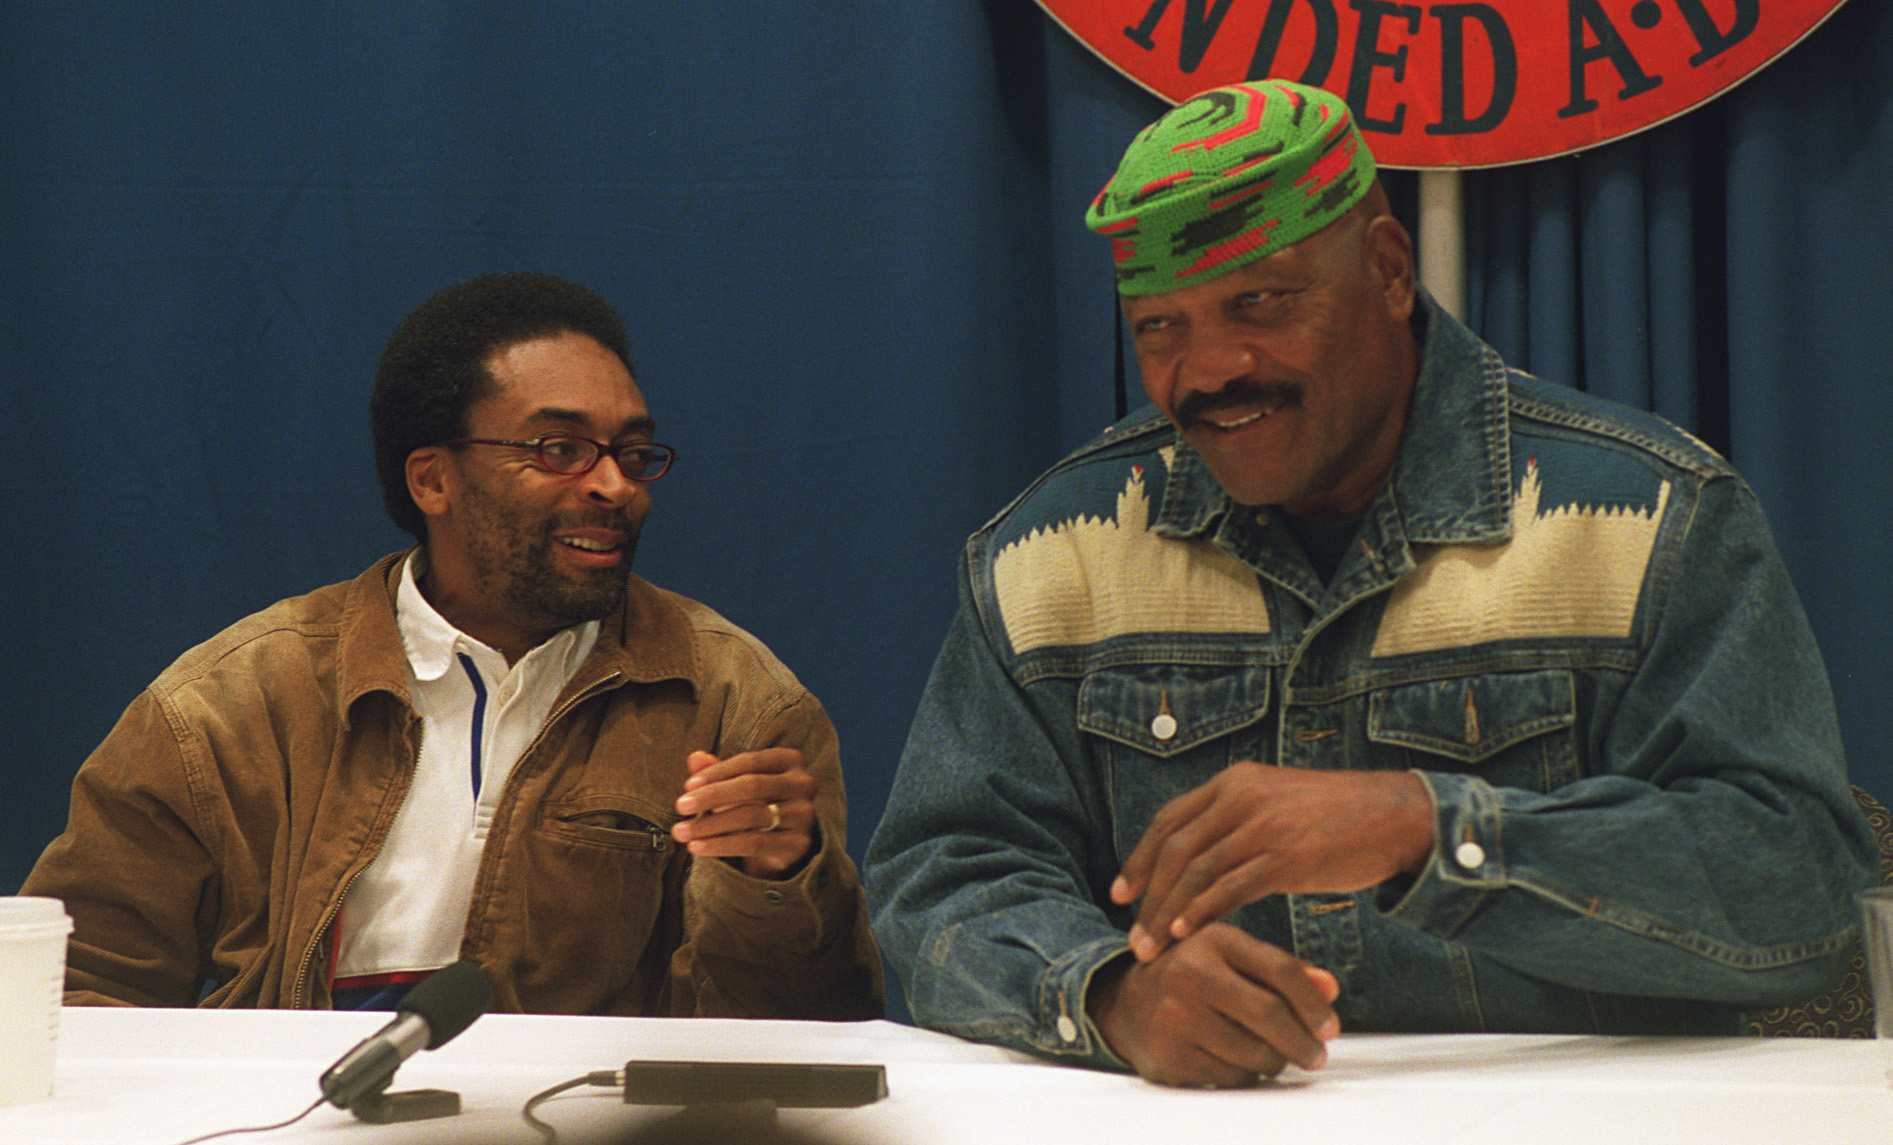 Filmmaker Spike Lee, left and football legend Jim Brown, right, chuckle during a press conference at Syracuse University in 2002 before the presentation of Lee's documentary of Brown's life entitled "JIm Brown; All-American." Brown played football and lacrosse at SU.